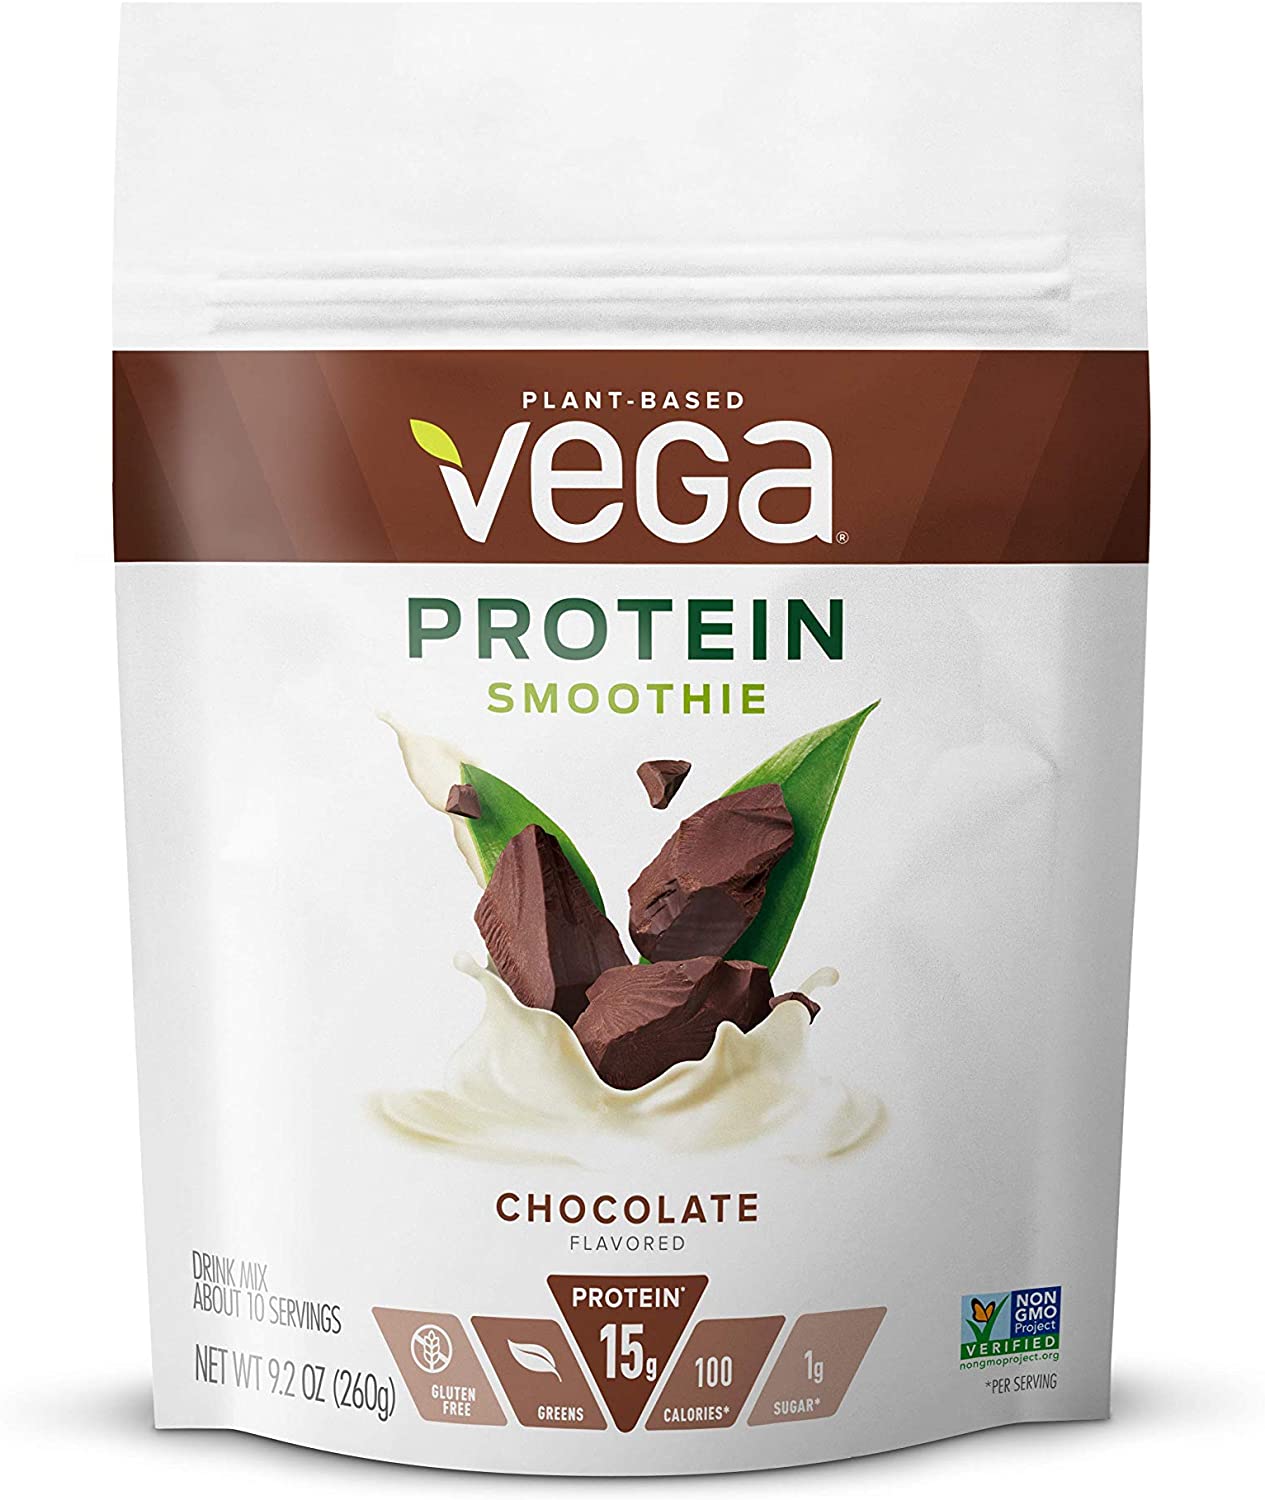 Vega Protein Smoothie, Chocolate, 10 Servings, 9.2 oz Pouch, Plant ...